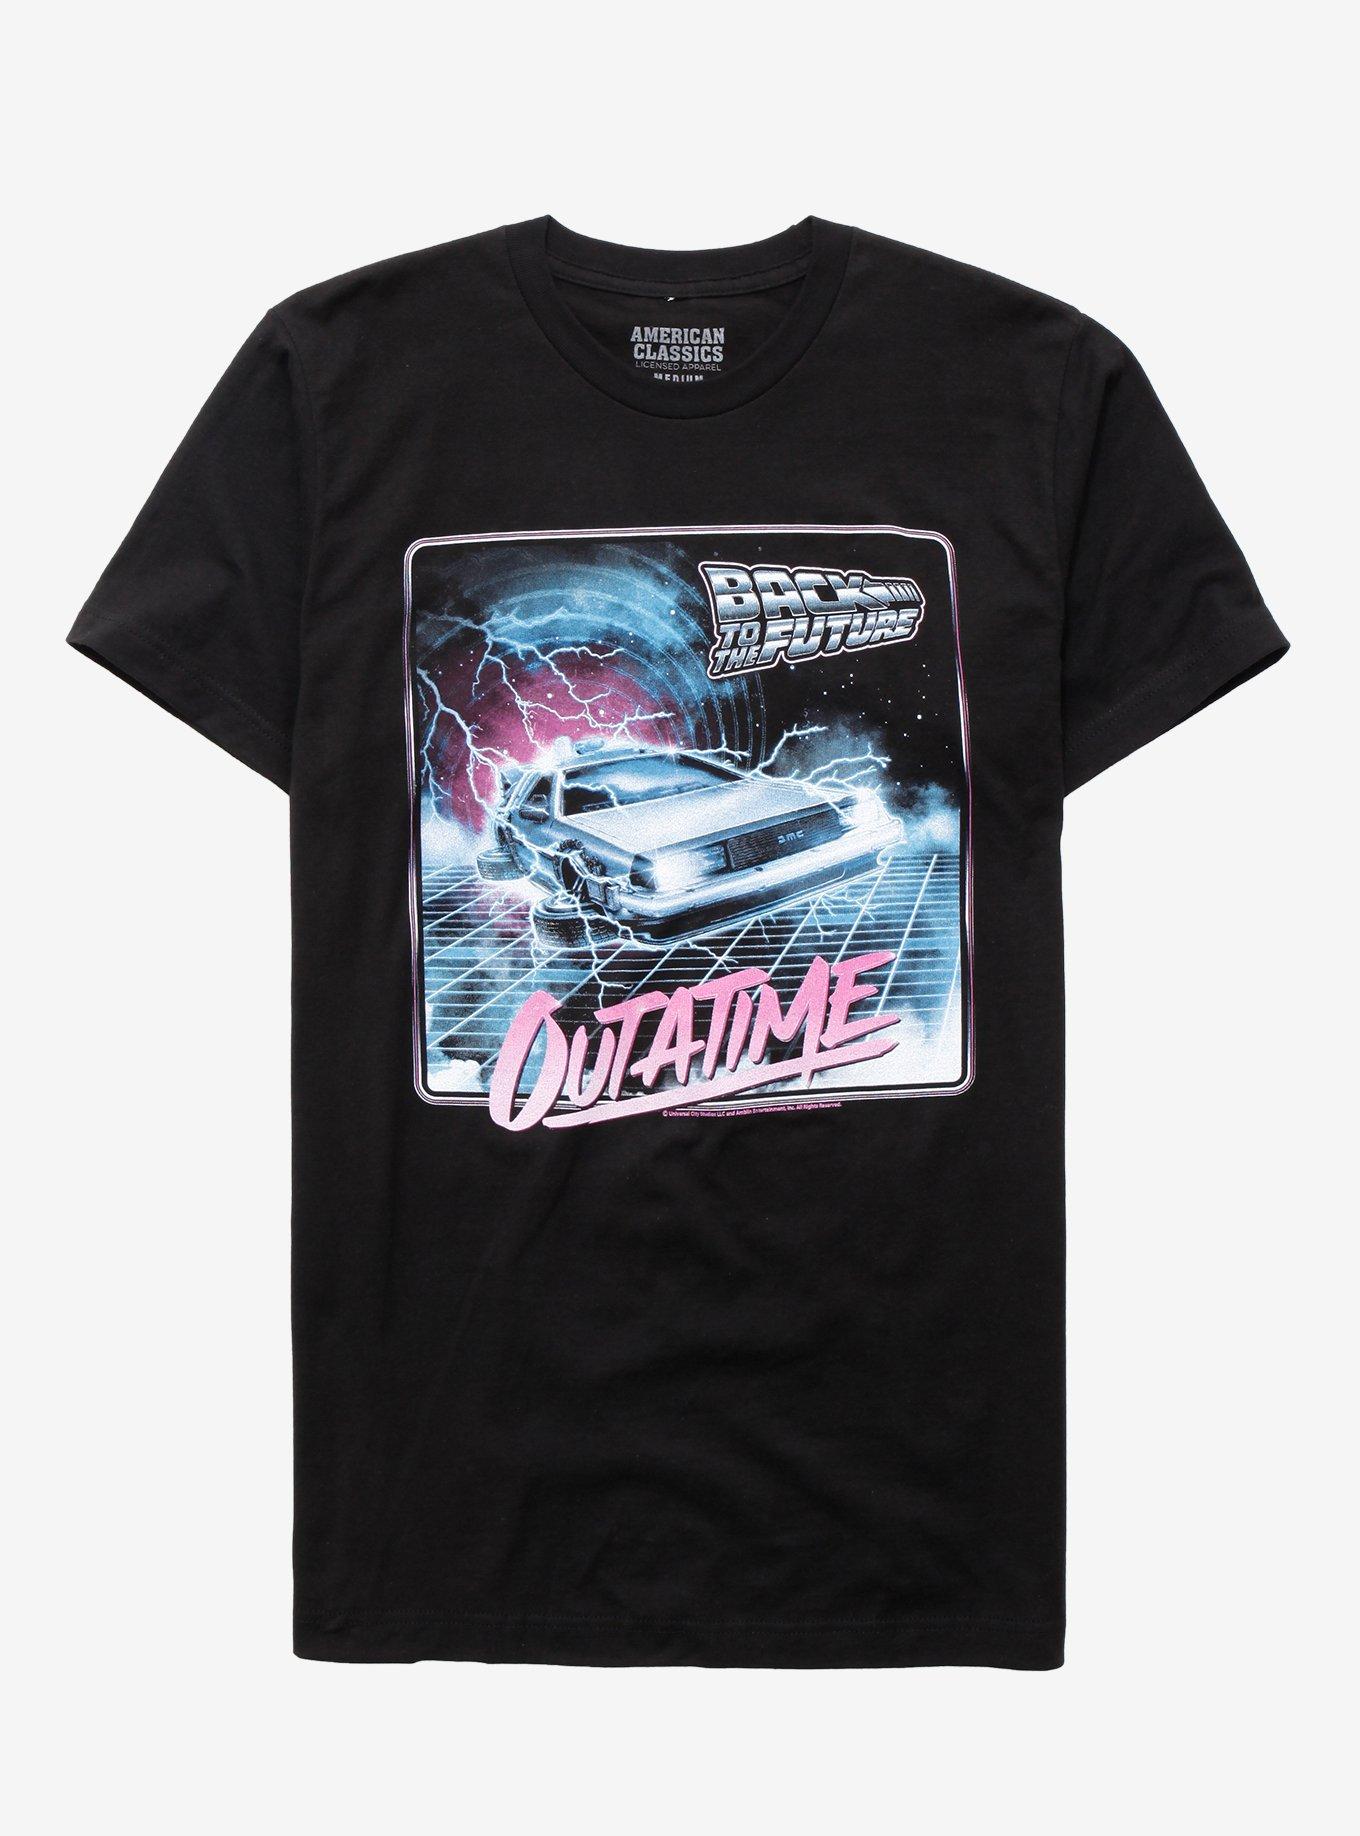 Back To The Future Outatime T-Shirt | Hot Topic